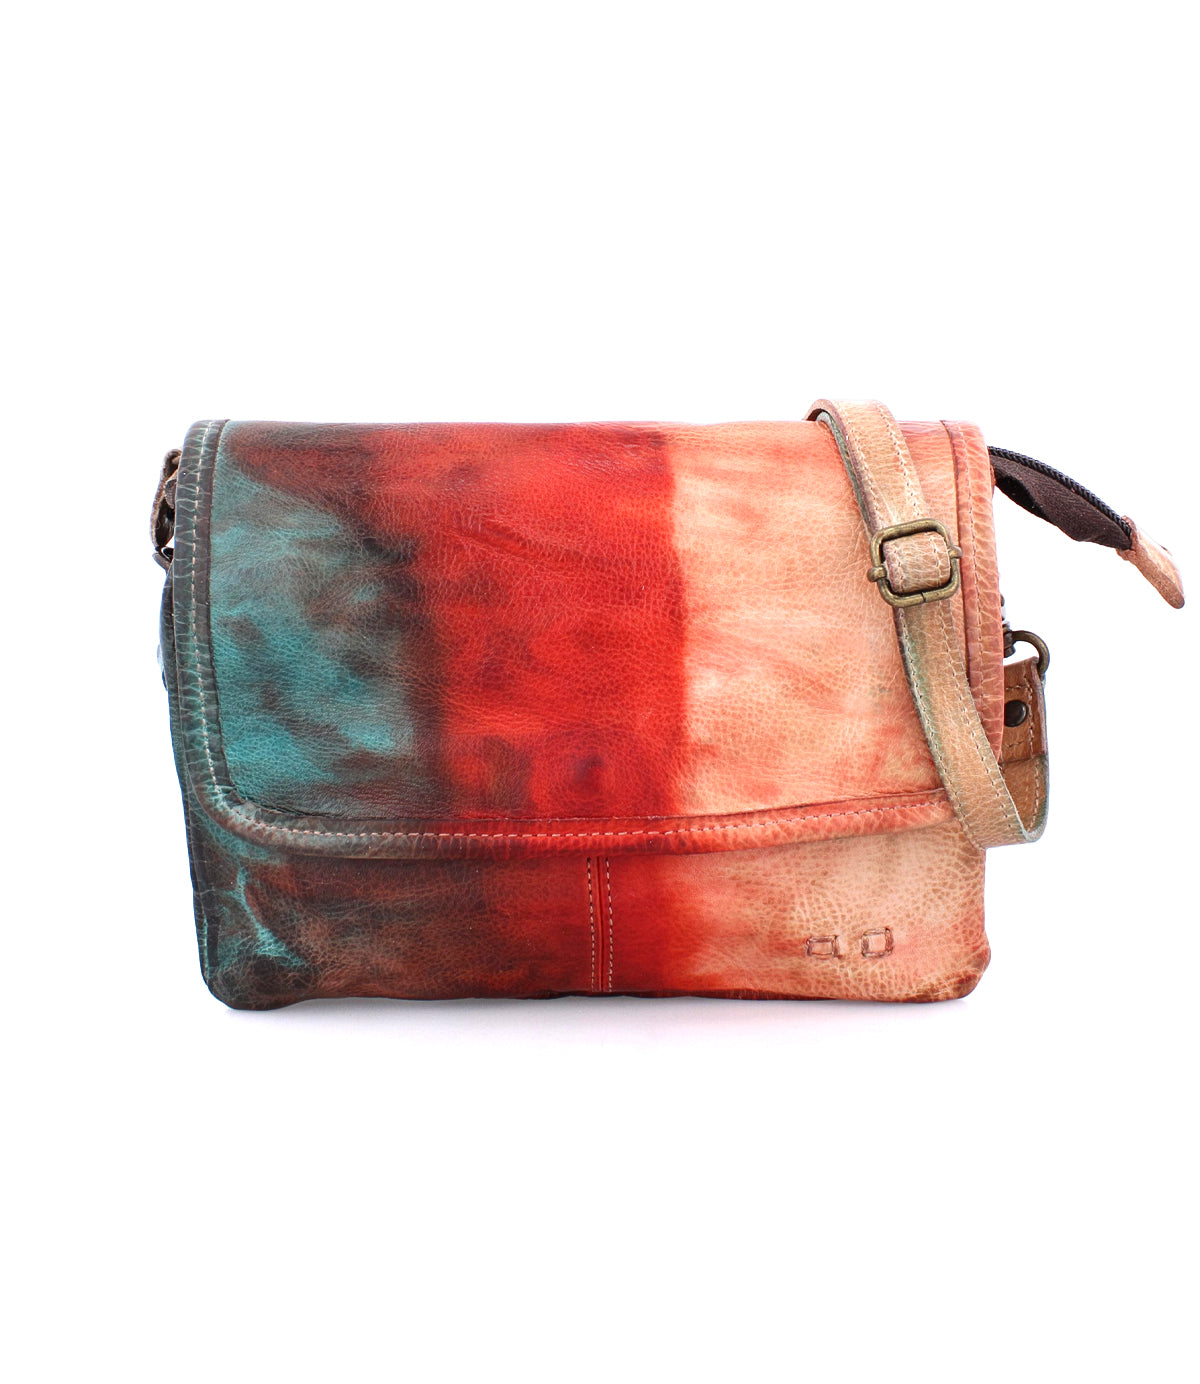 A Ziggy crossbody bag with a red, blue, and green dye by Bed Stu.